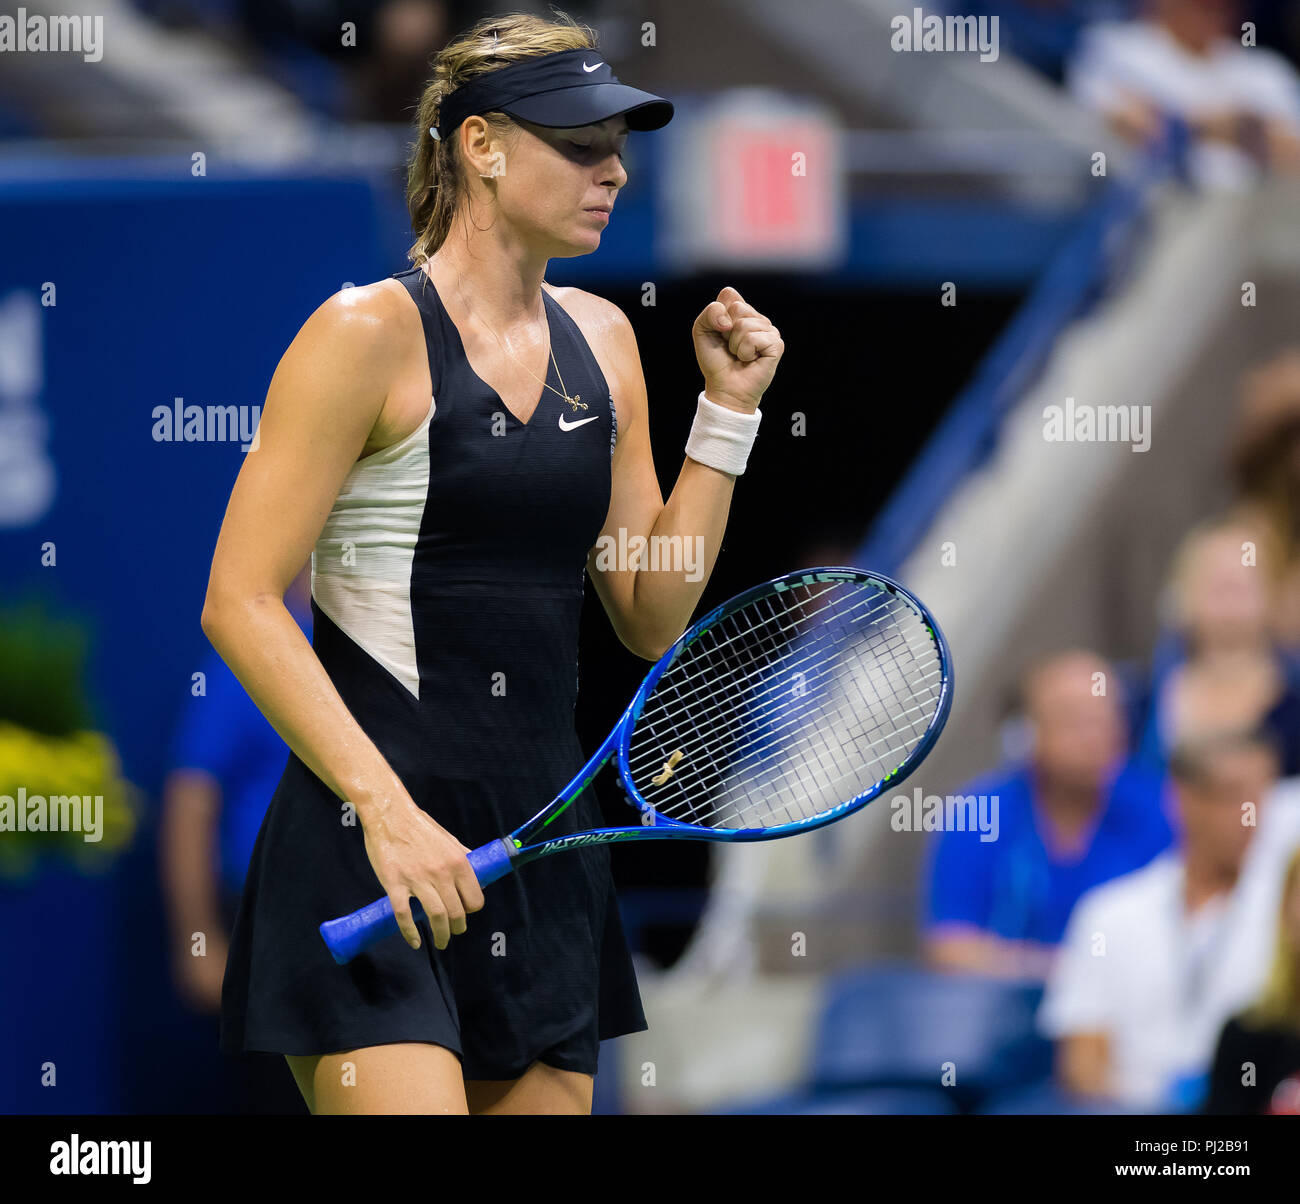 New York, USA. 3rd September, 2018. September 3, 2018 - Maria Sharapova of Russia in action during her fourth-round match at the 2018 US Open Grand Slam tennis tournament. New York, USA. September 03th 2018. Credit: AFP7/ZUMA Wire/Alamy Live News Stock Photo